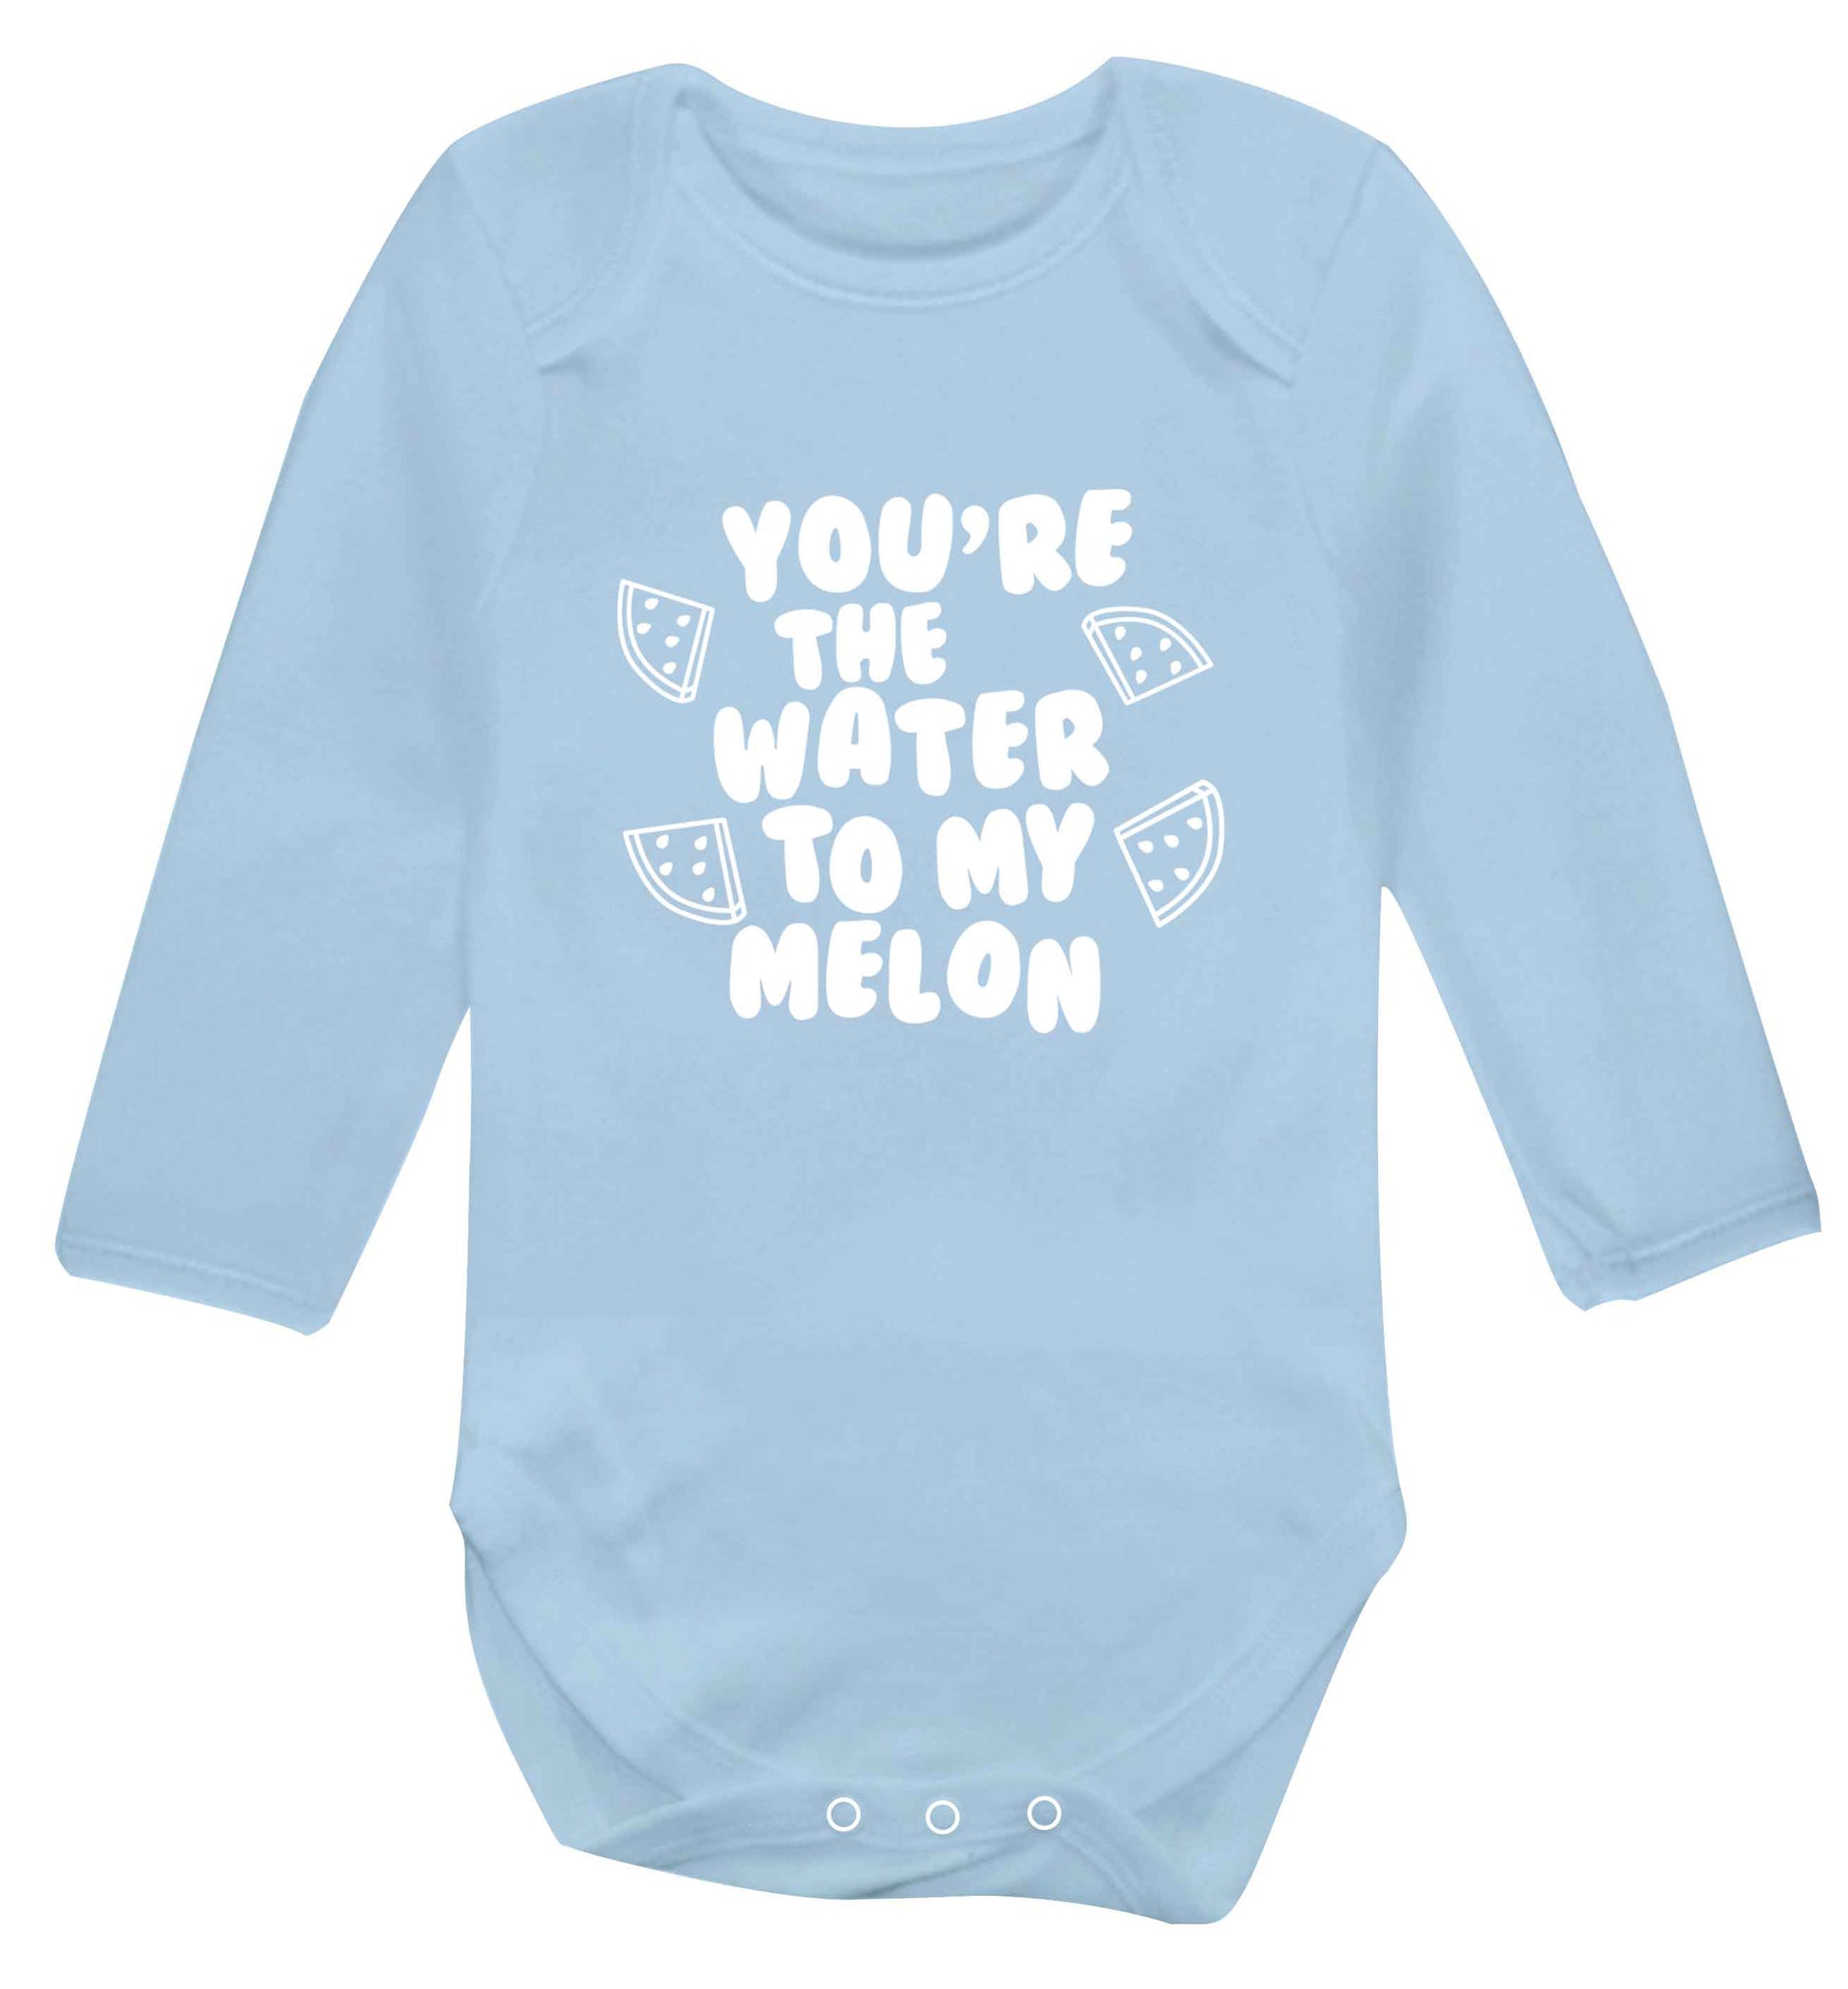 You're the water to my melon baby vest long sleeved pale blue 6-12 months